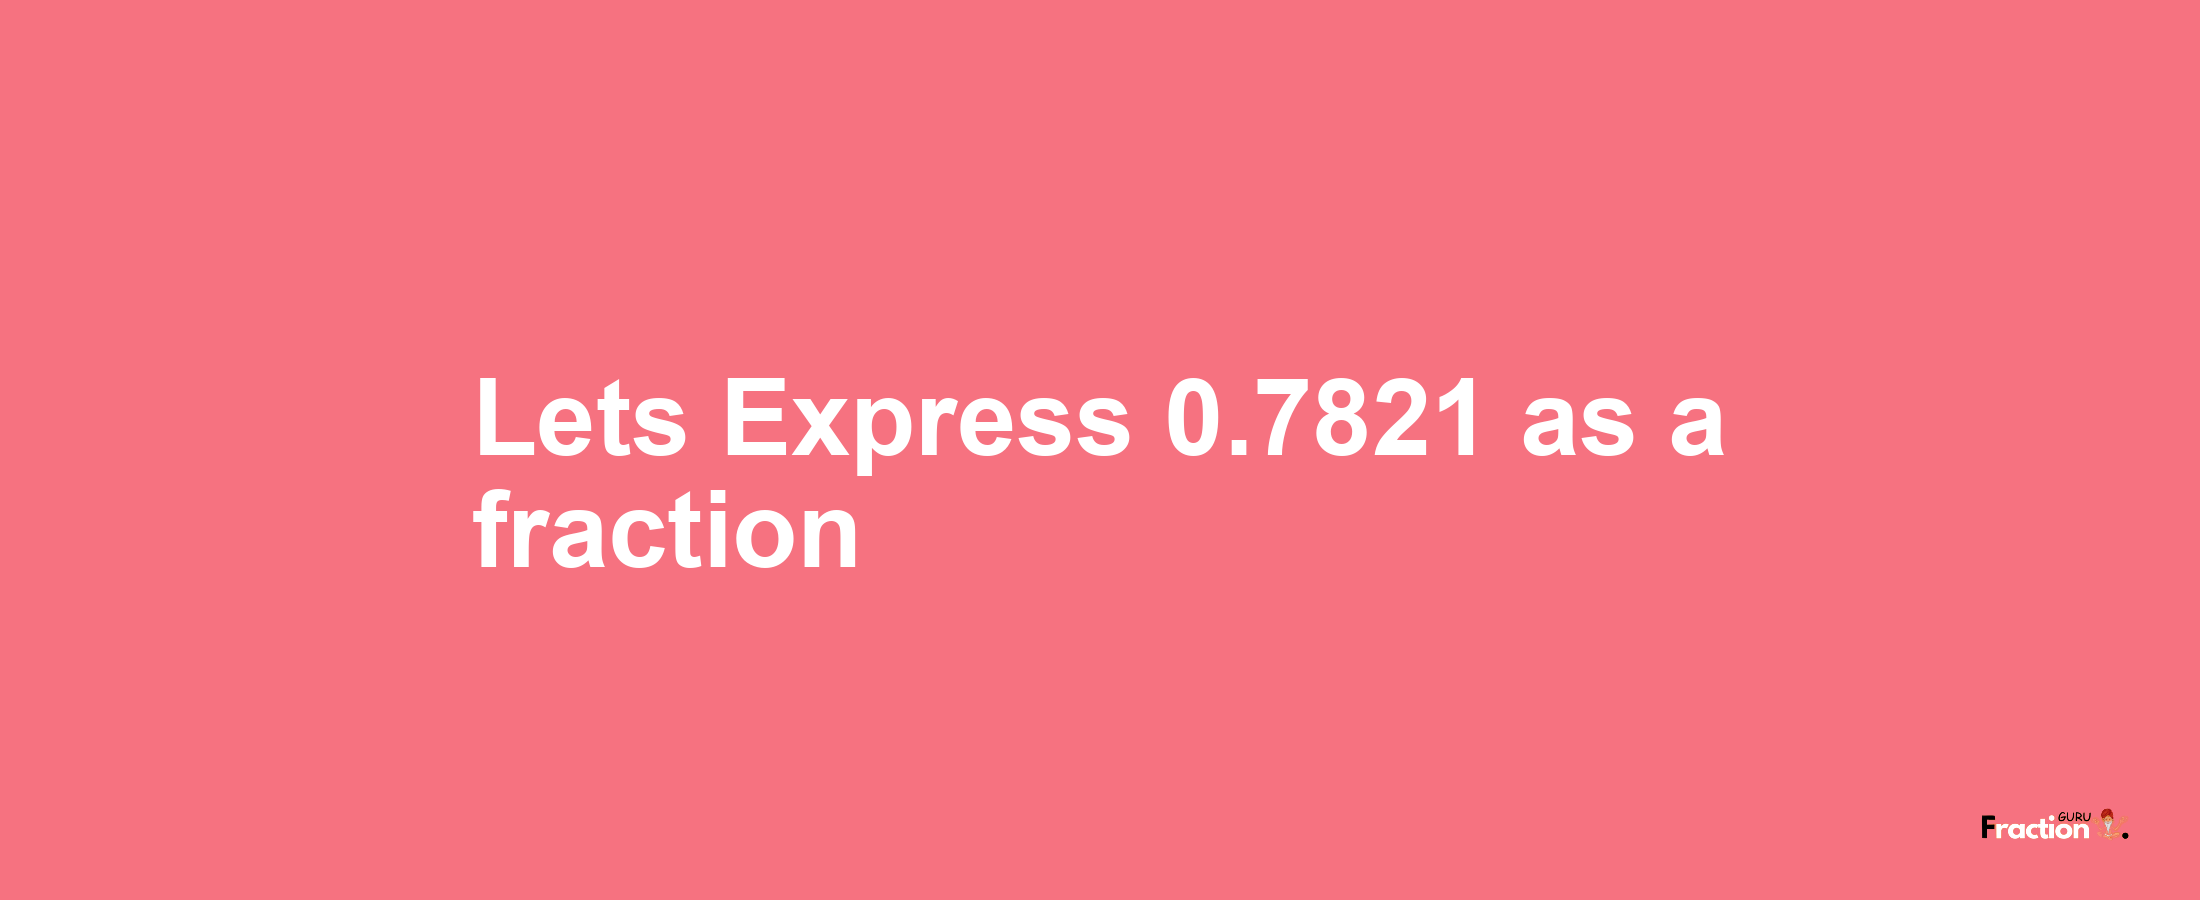 Lets Express 0.7821 as afraction